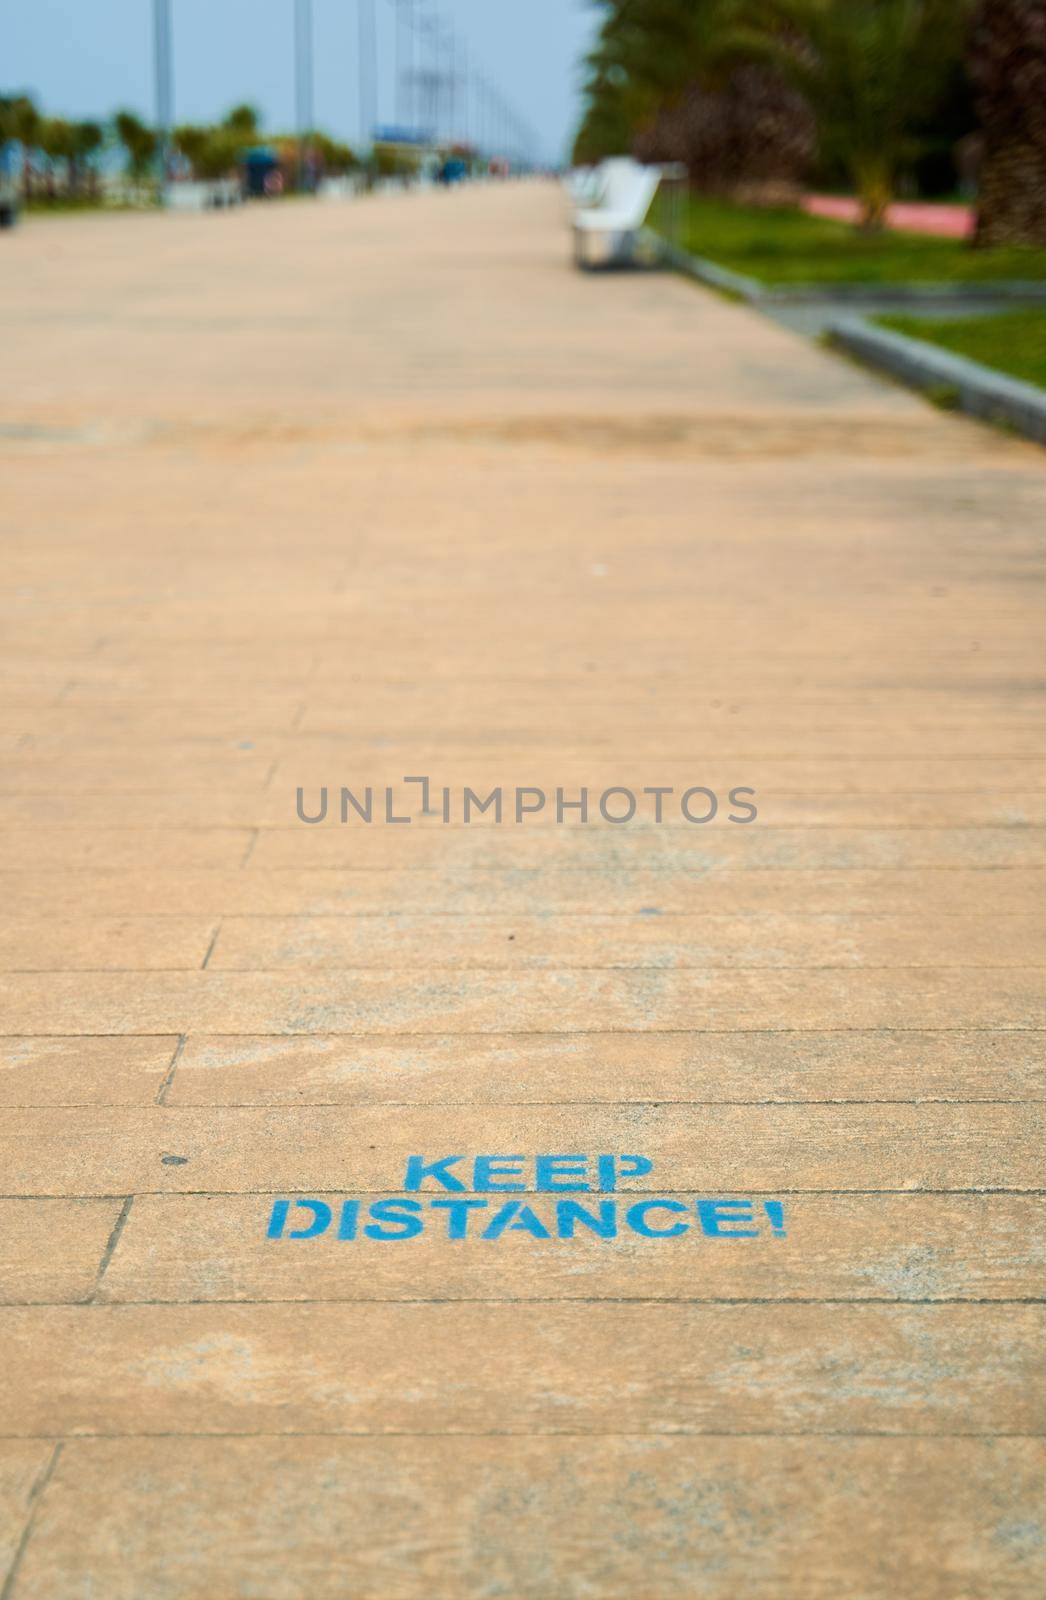 the inscription on the floor is a reminder of keeping the distance. Walking path on the embankment.